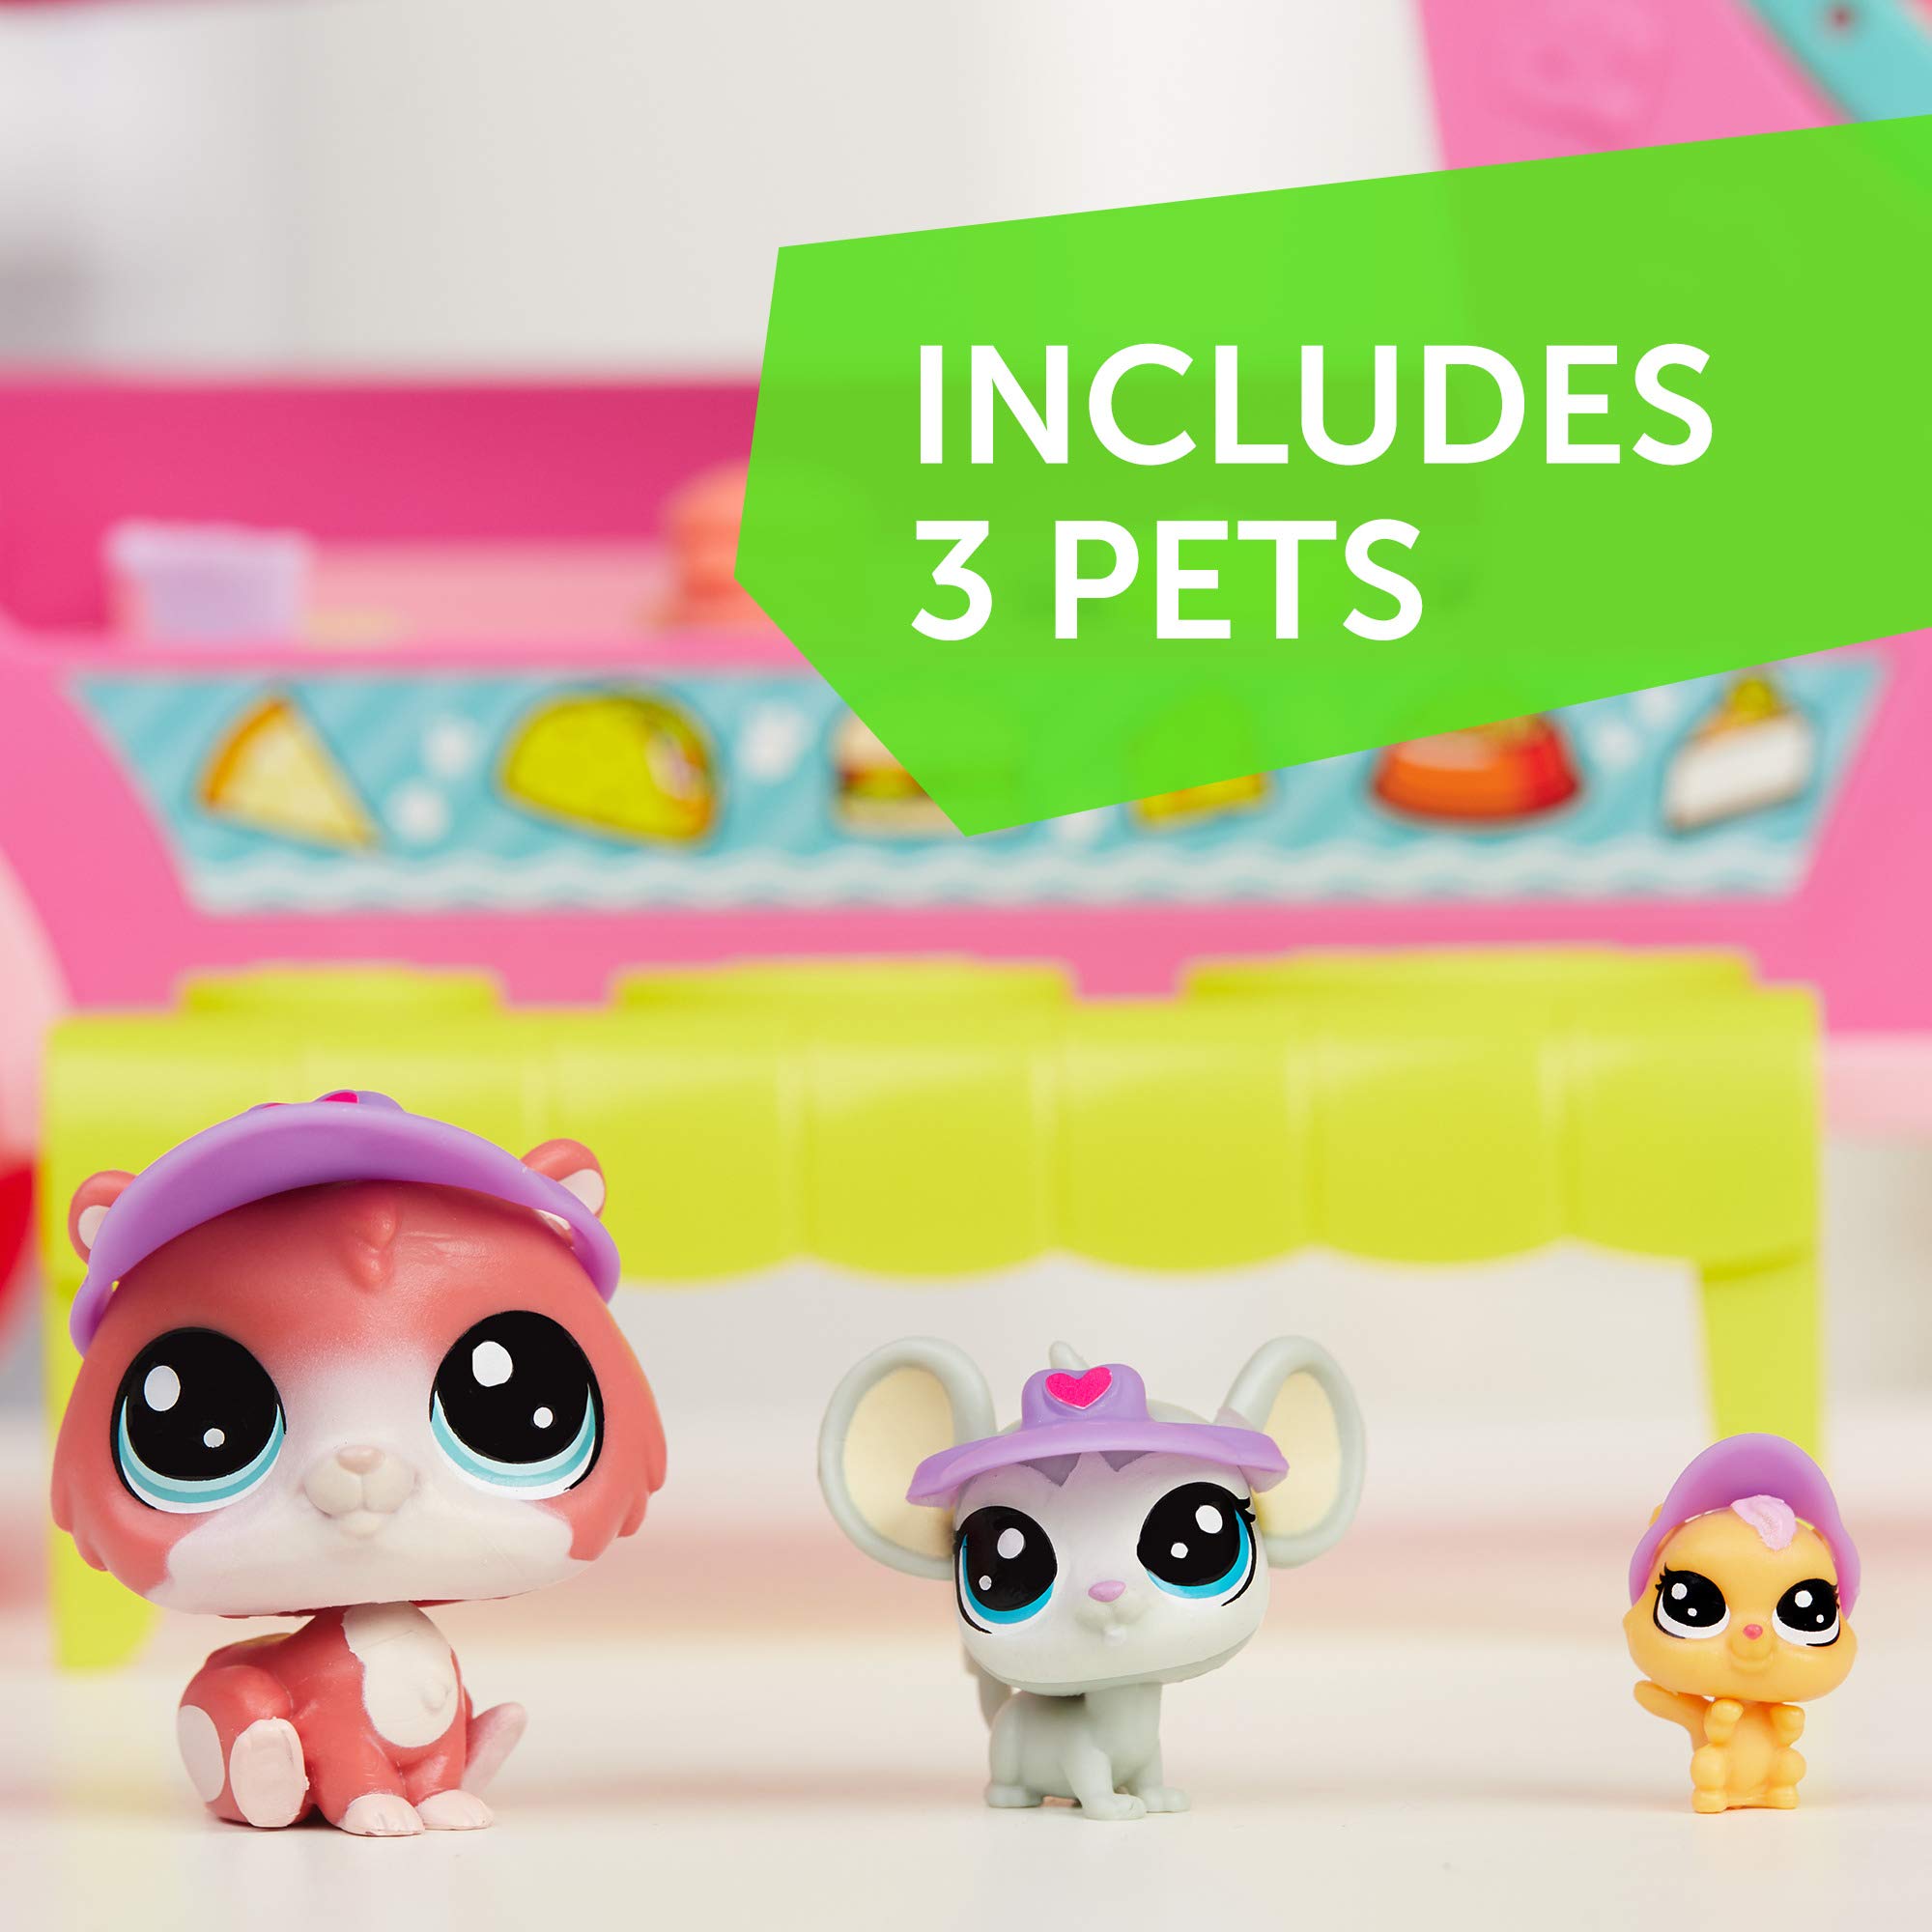 Littlest Pet Shop Tr’eats Truck Playset Toy, Rolling Wheels, Adult Assembly Required (No Tools Needed), Ages 4 and Up